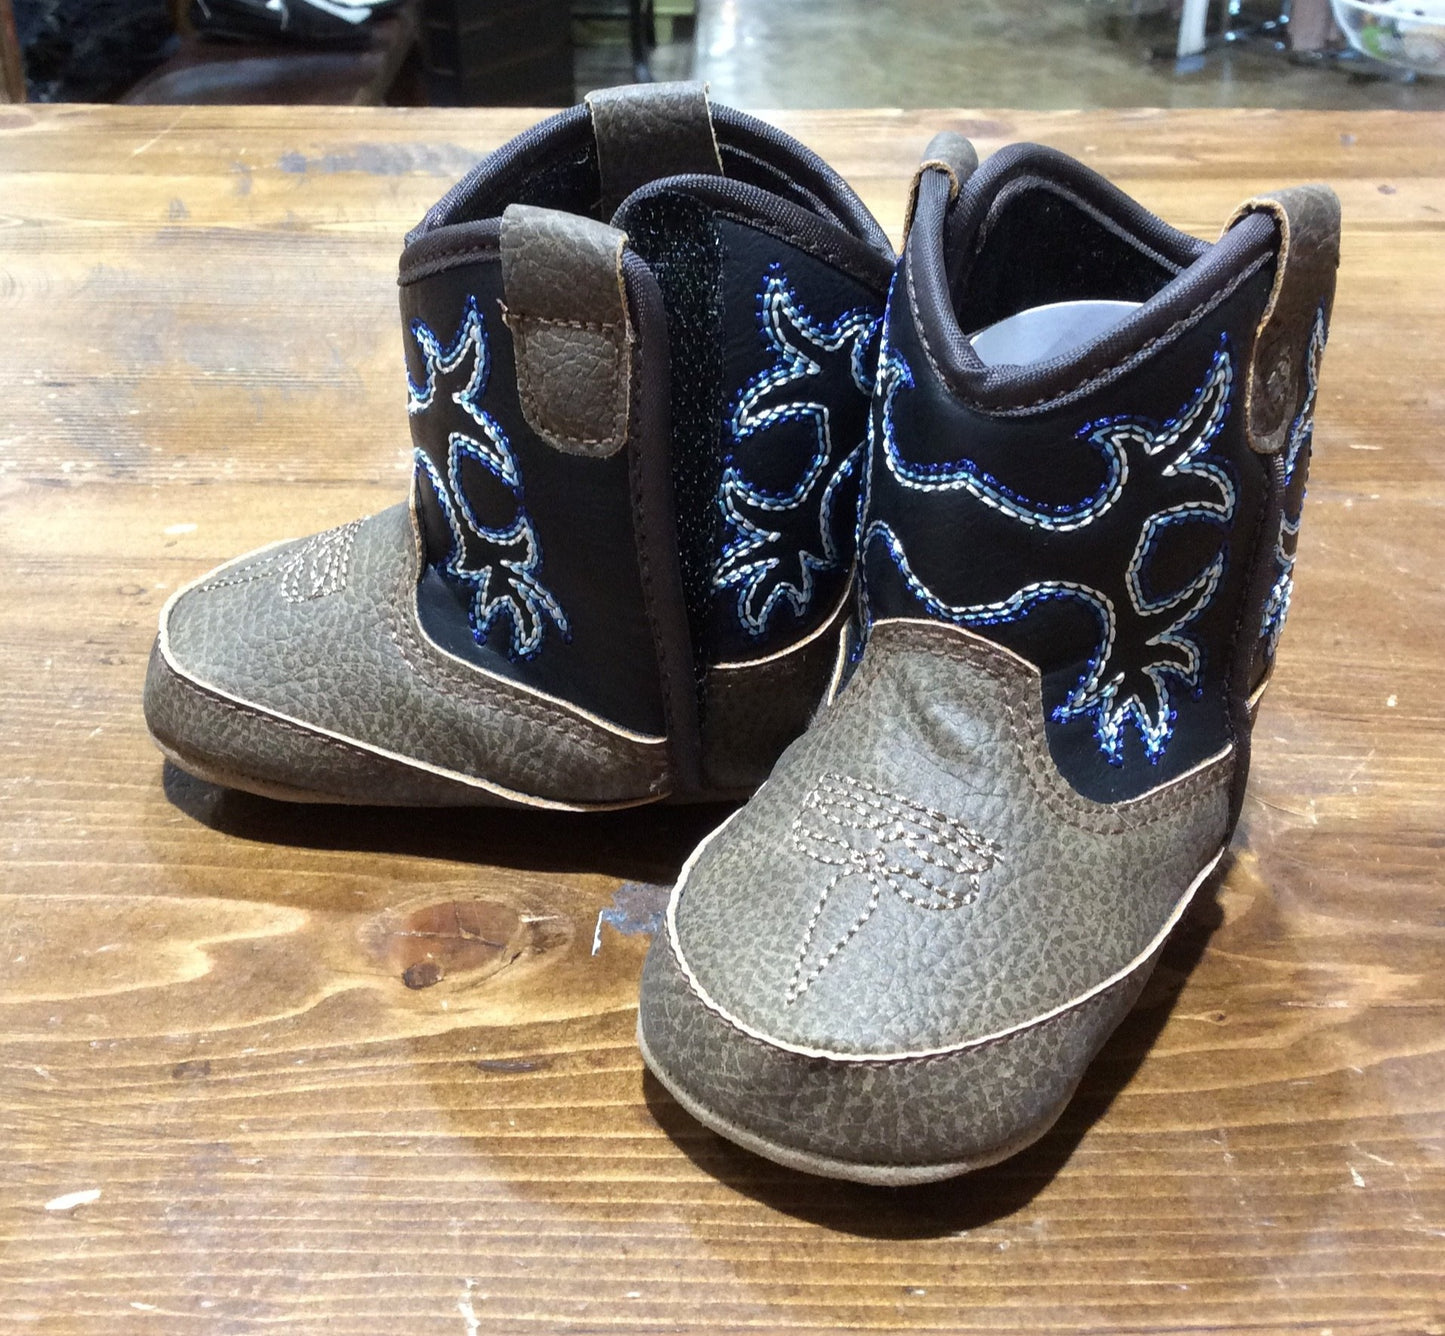 ARIAT LIL' STOMPERS "TOMBSTONE" INFANT BOOTS